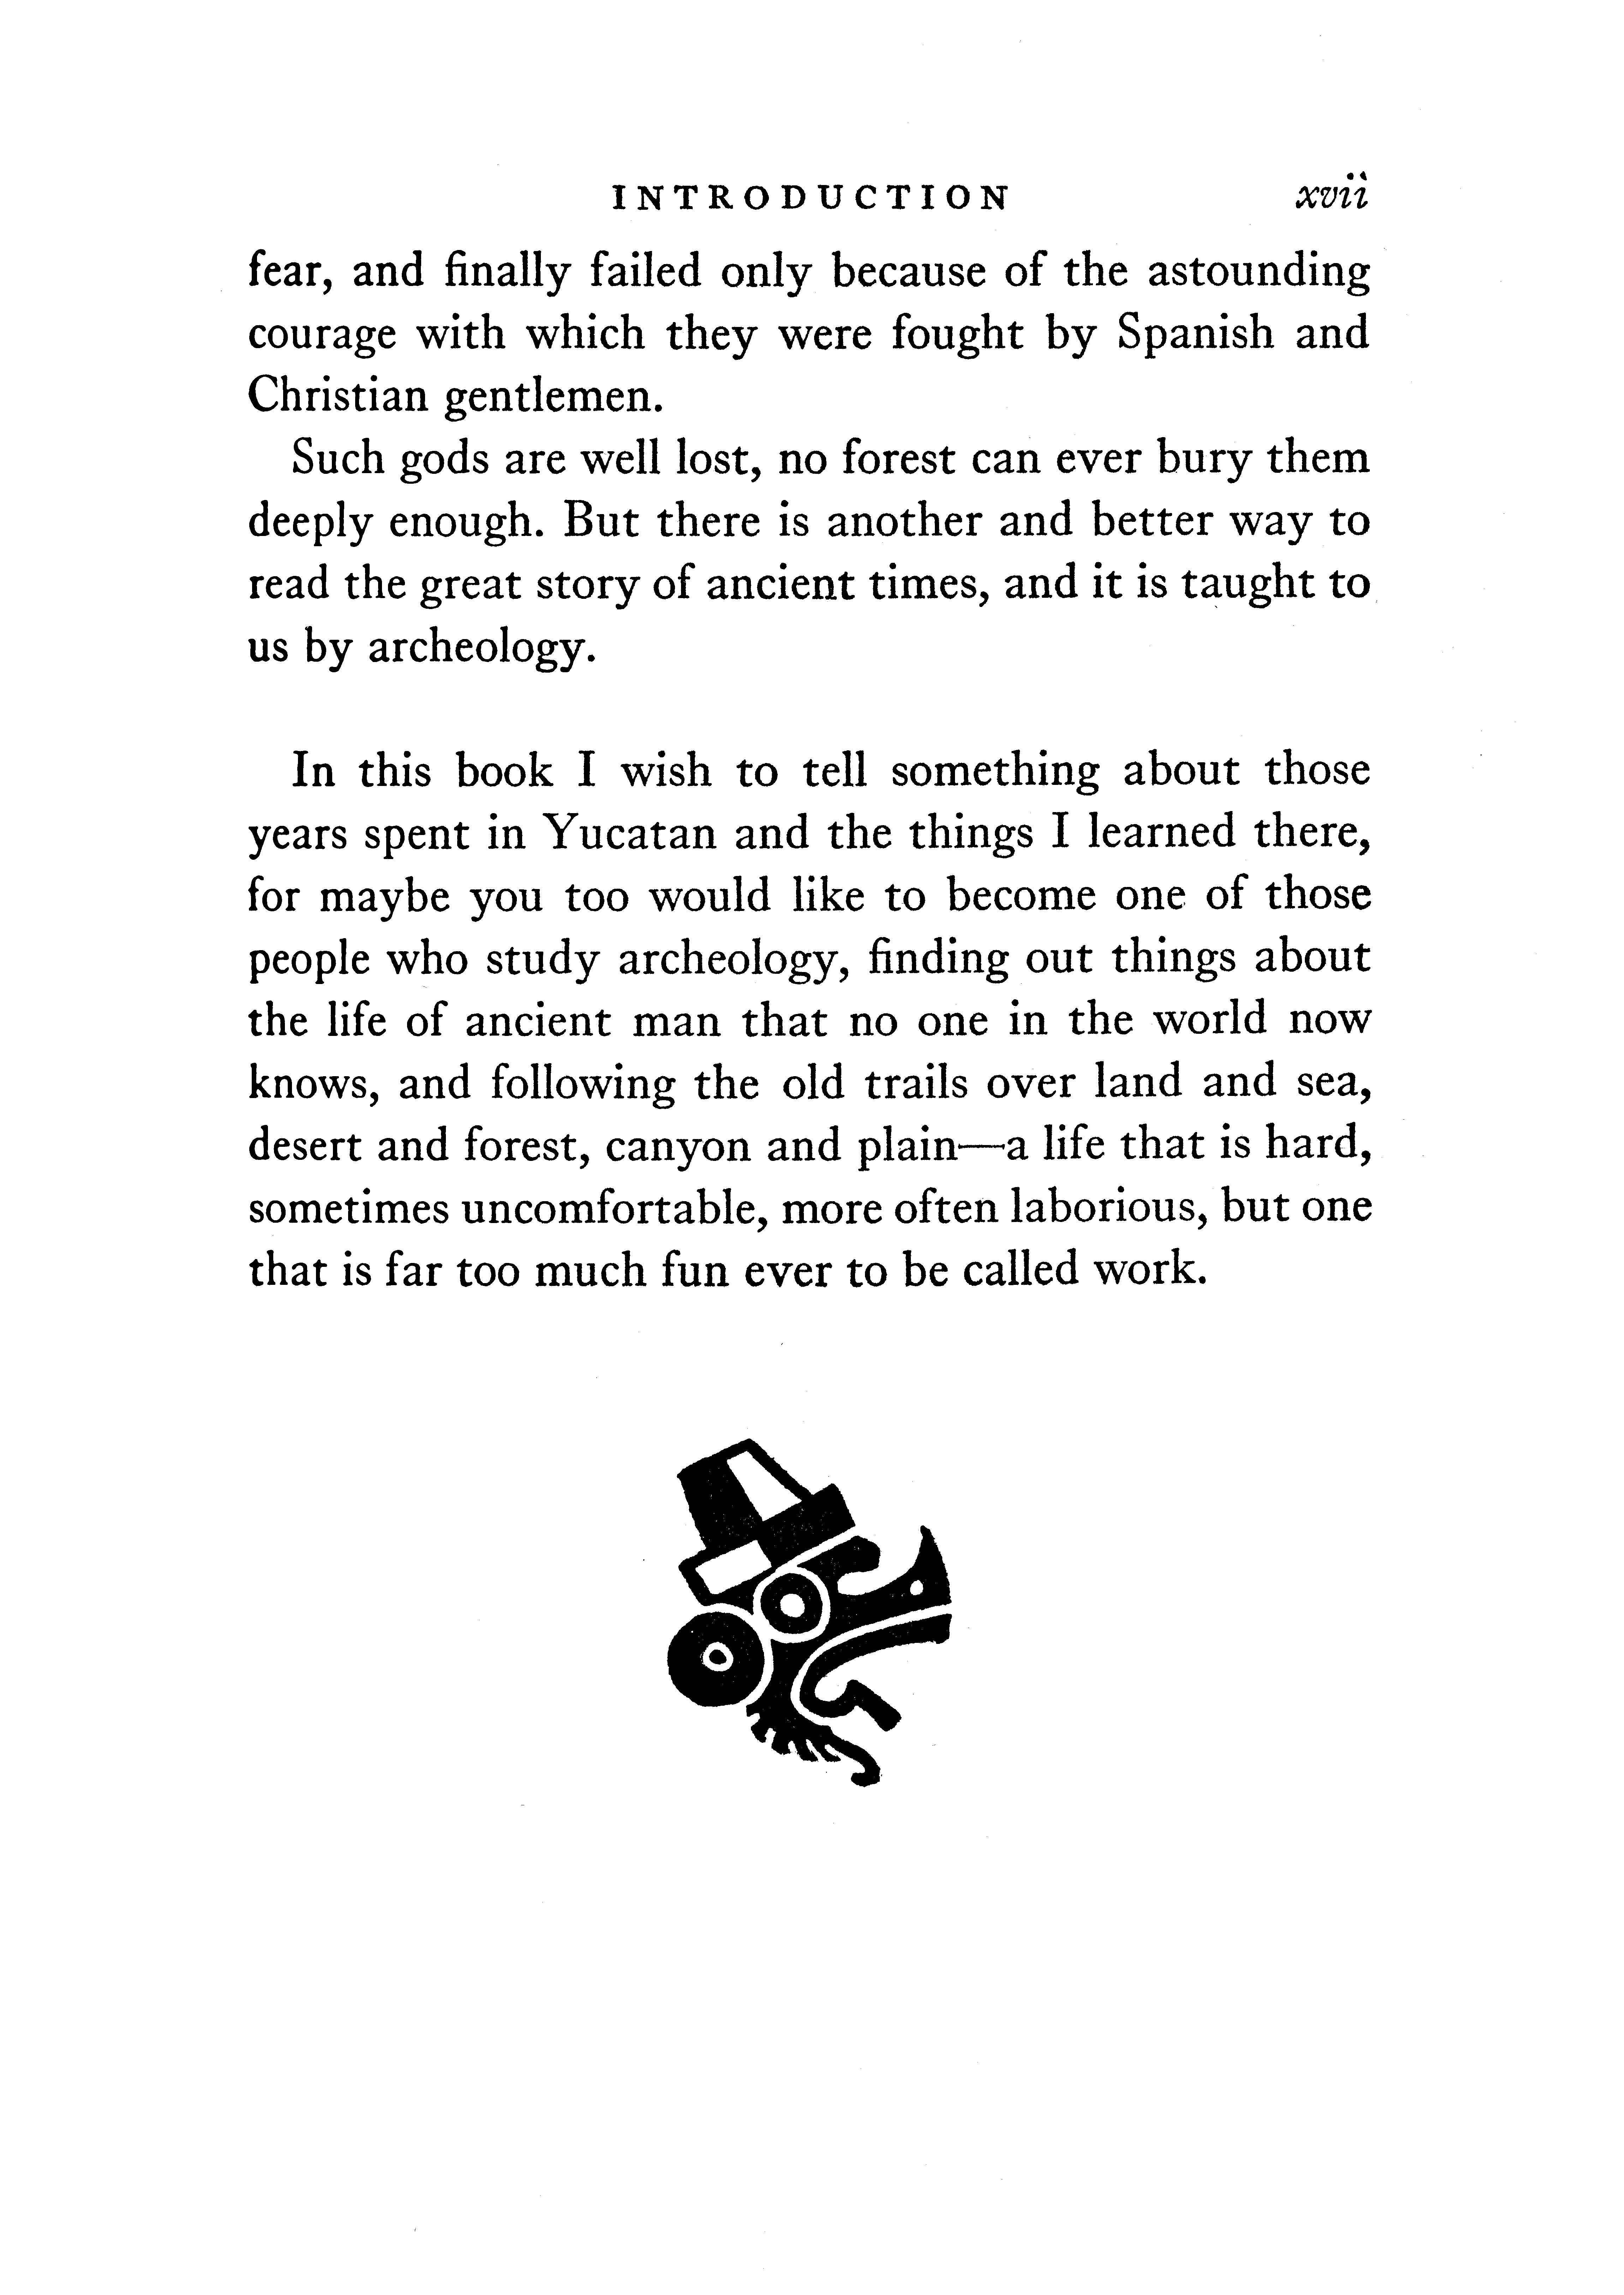 Page 17 of front matter for 'Digging in Yucatan' written by Ann Axtell Morris.  Decorations by Jean Charlot.